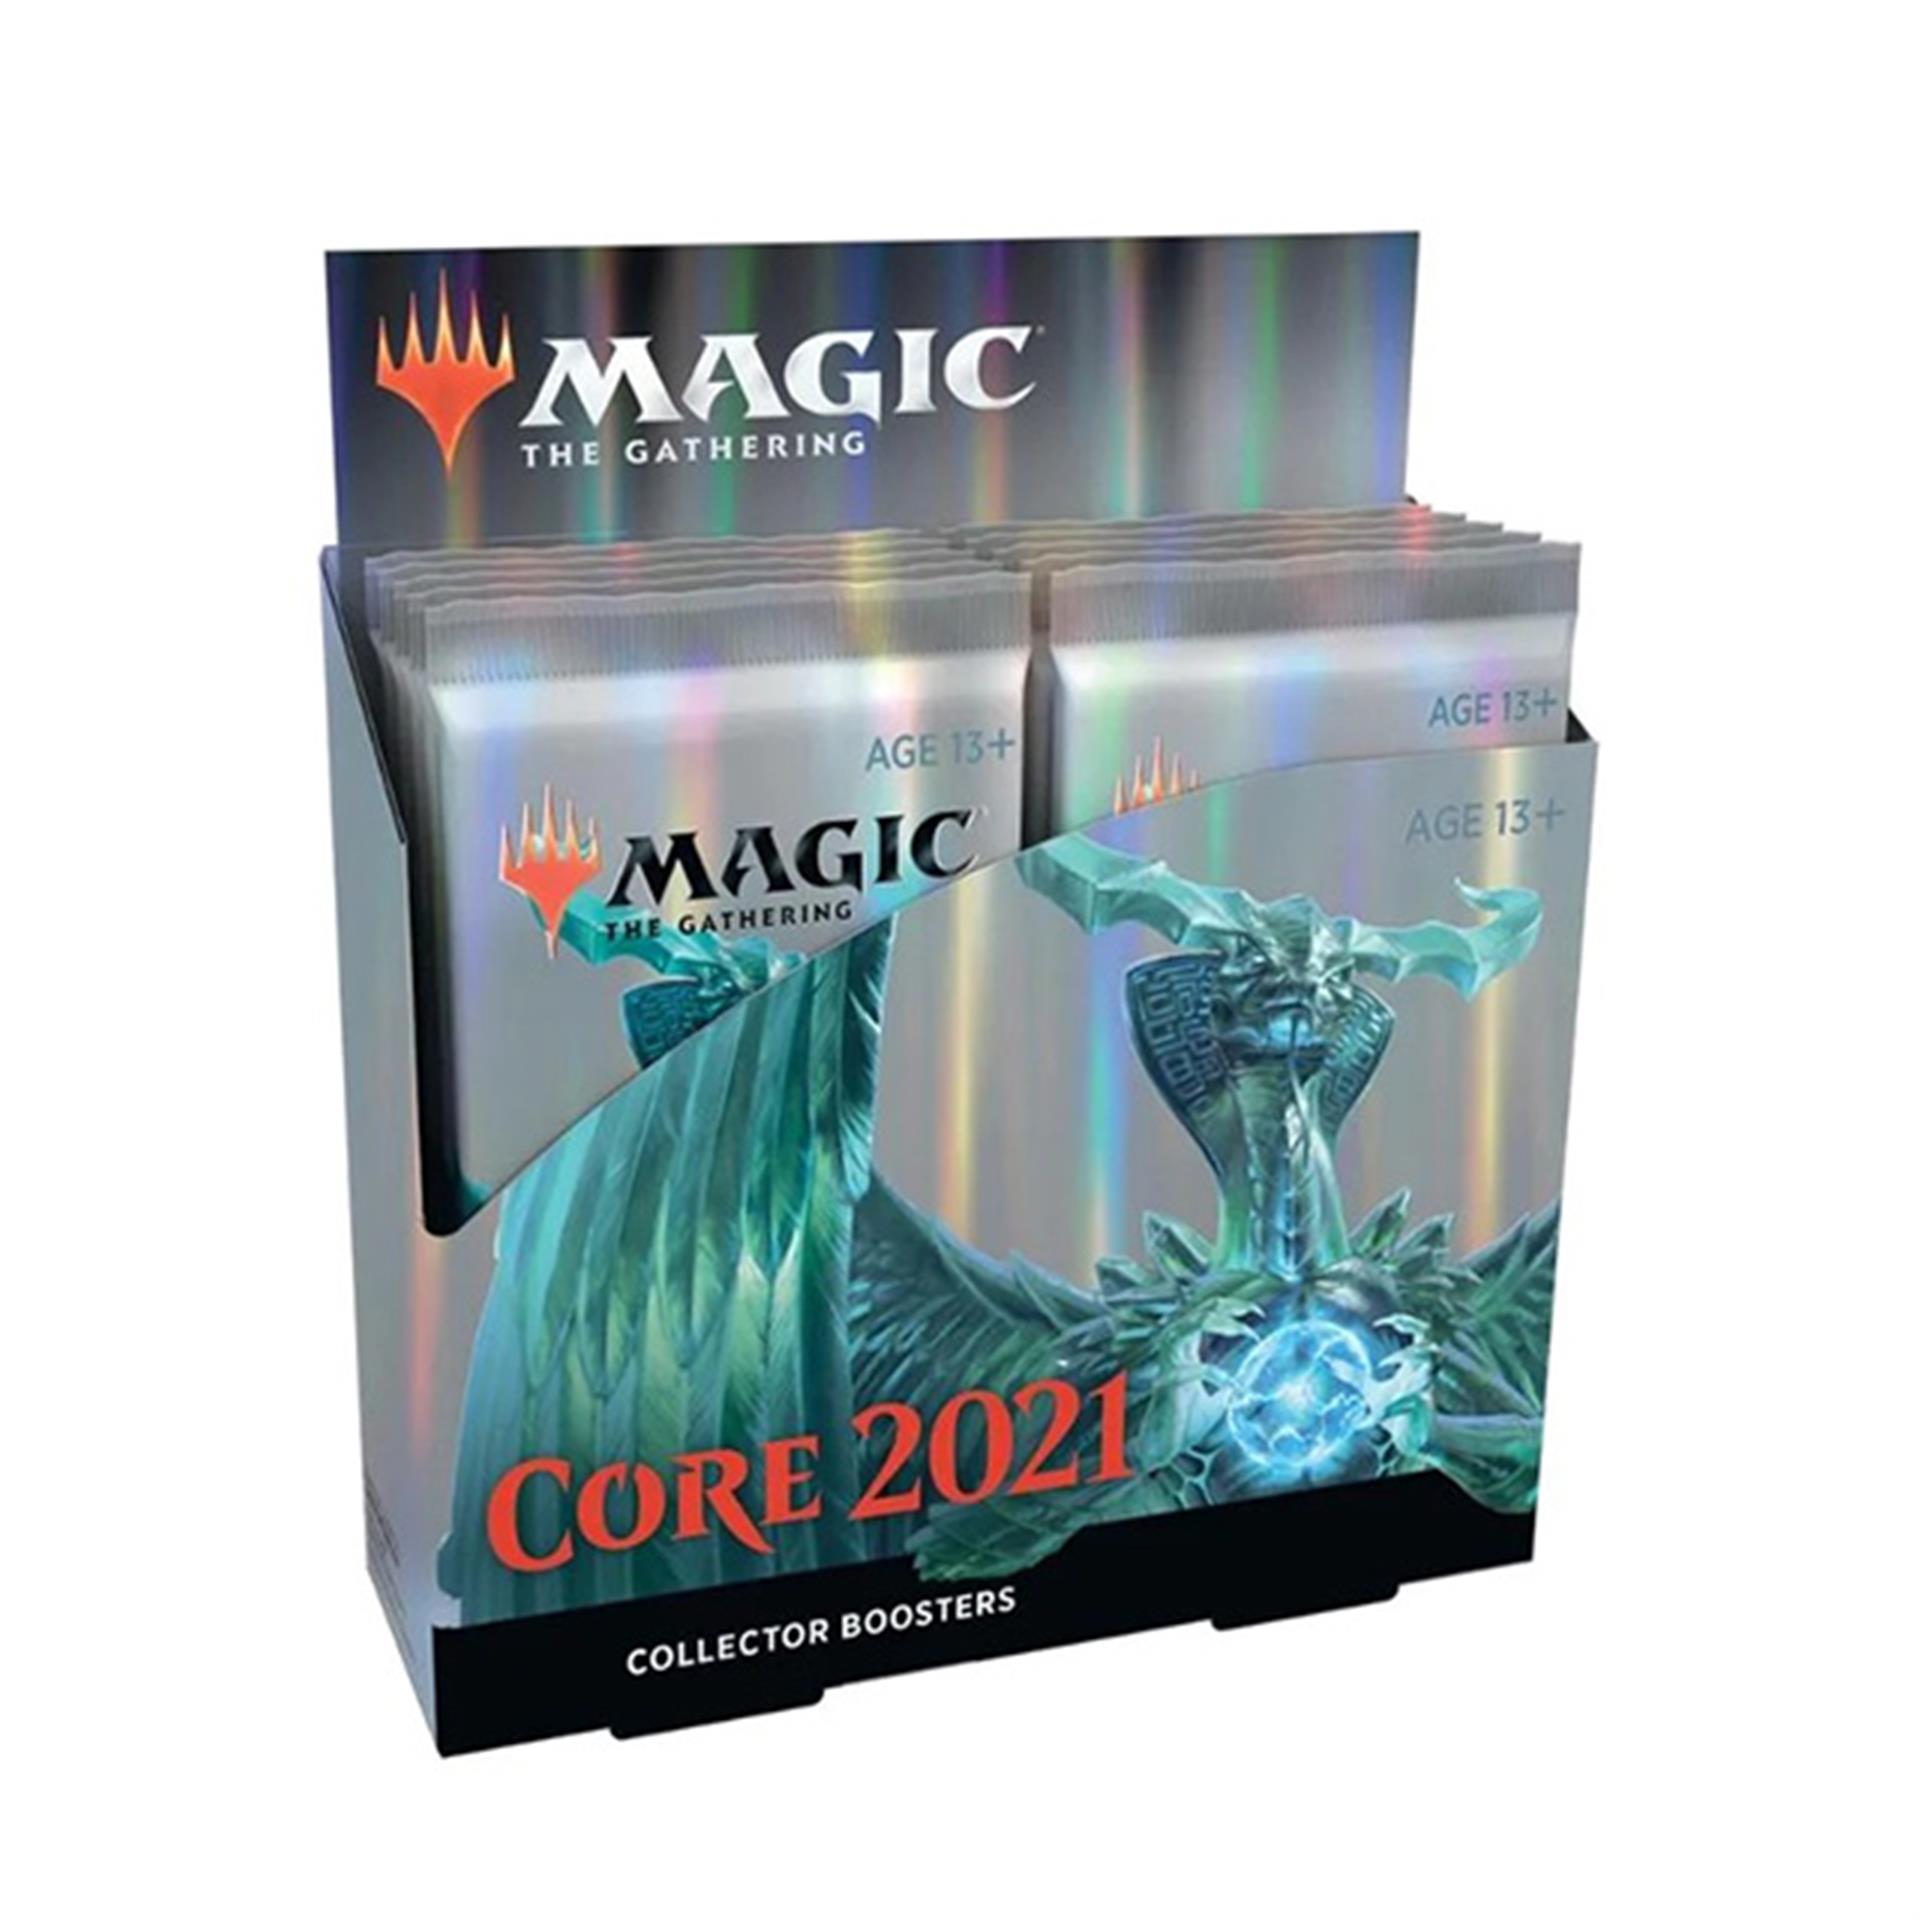 Magic: The Gathering – Core 2021 Collectors Booster Display